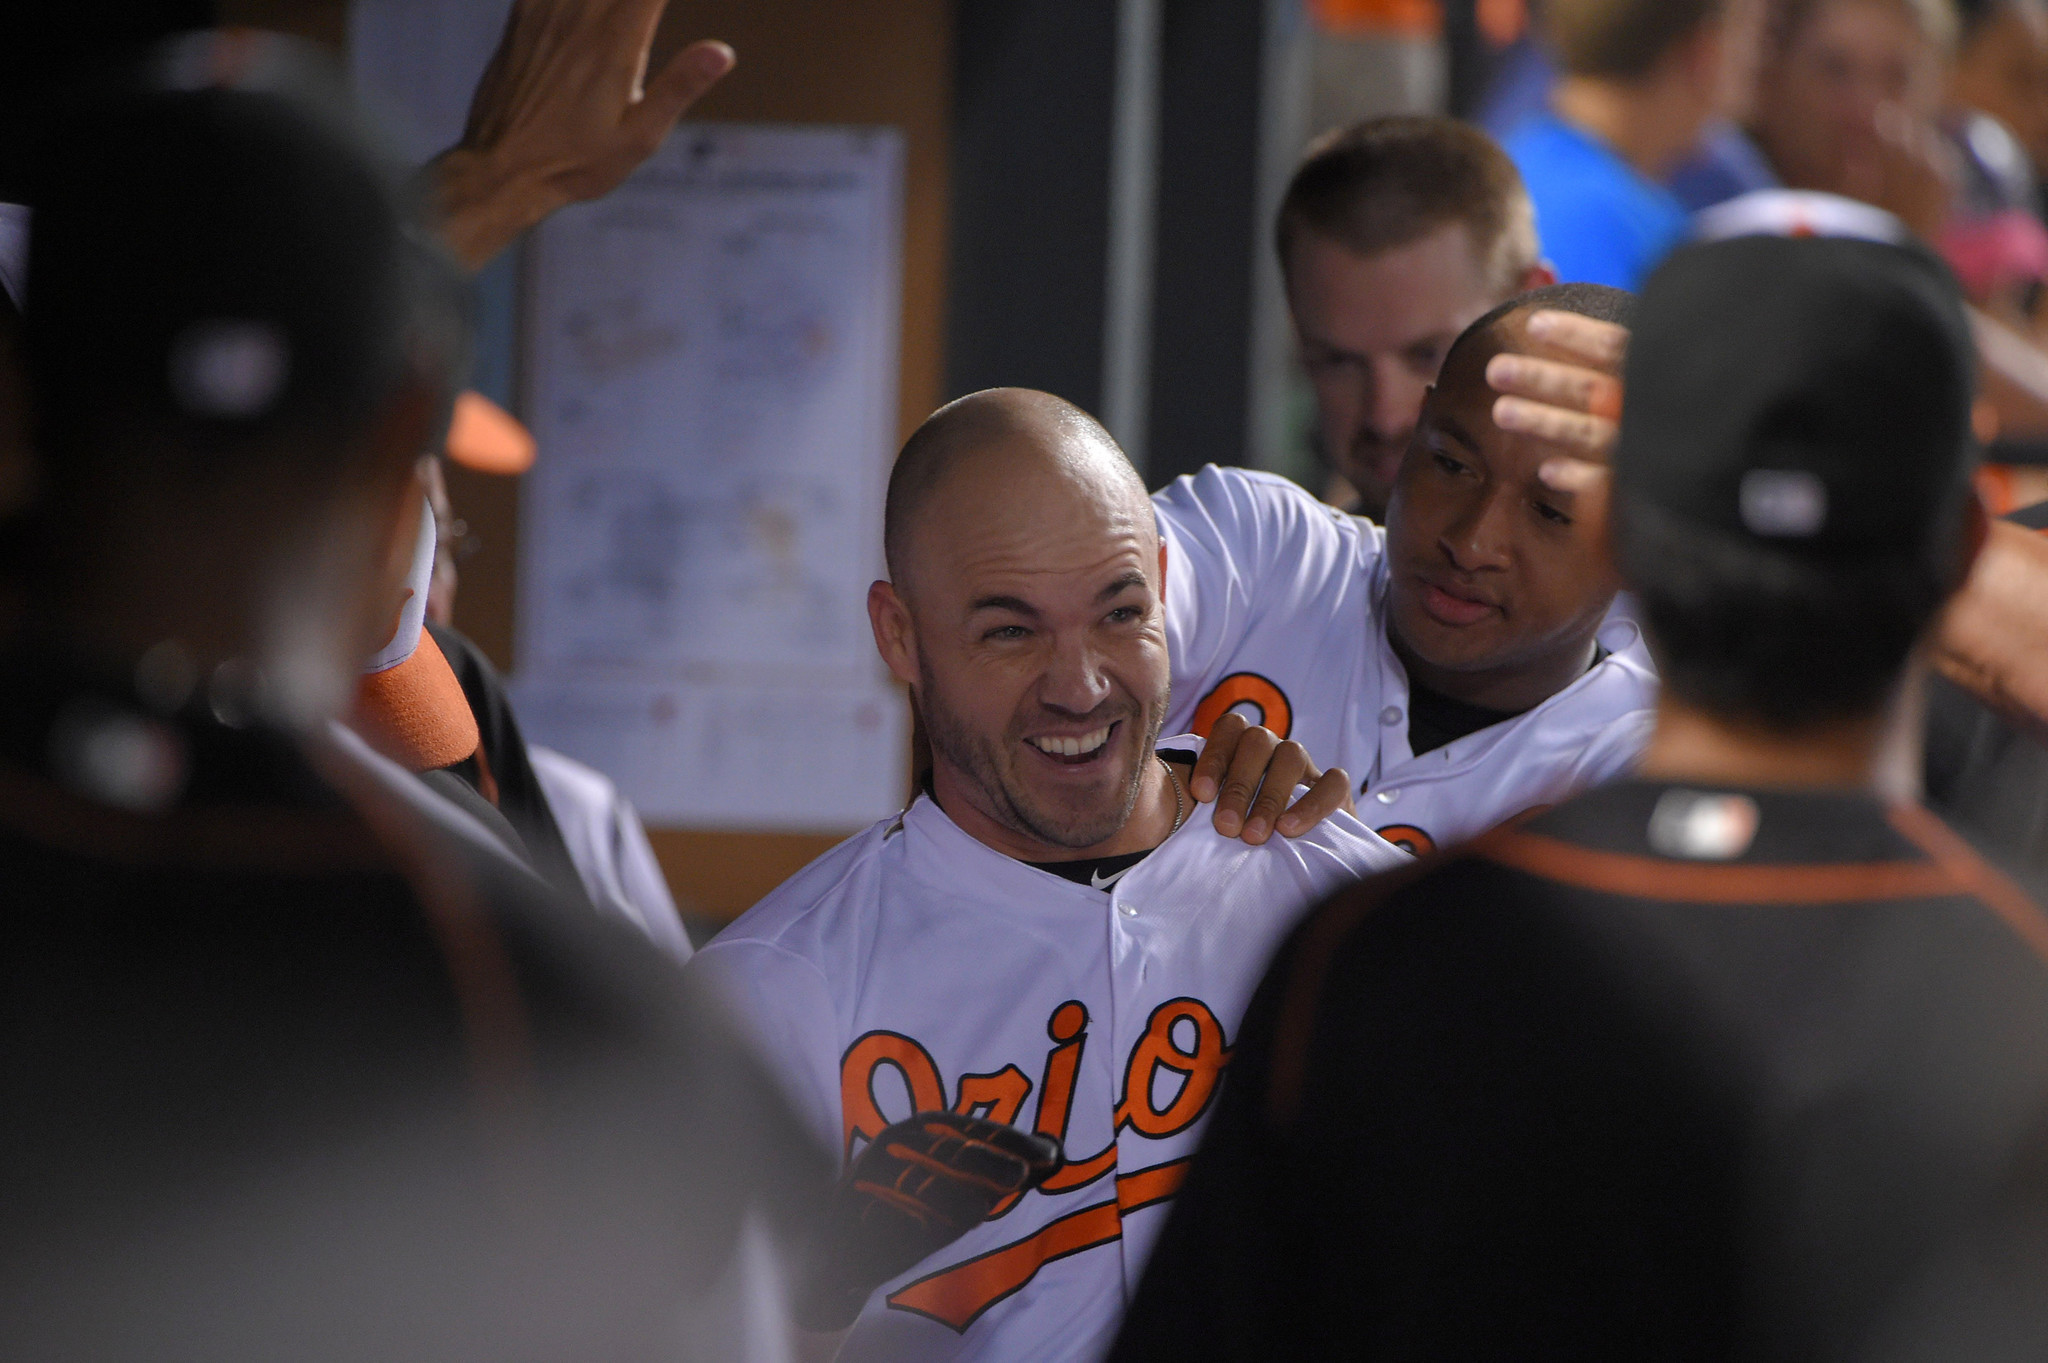 Steve Pearce reportedly signs with Blue Jays, exits Baltimore again